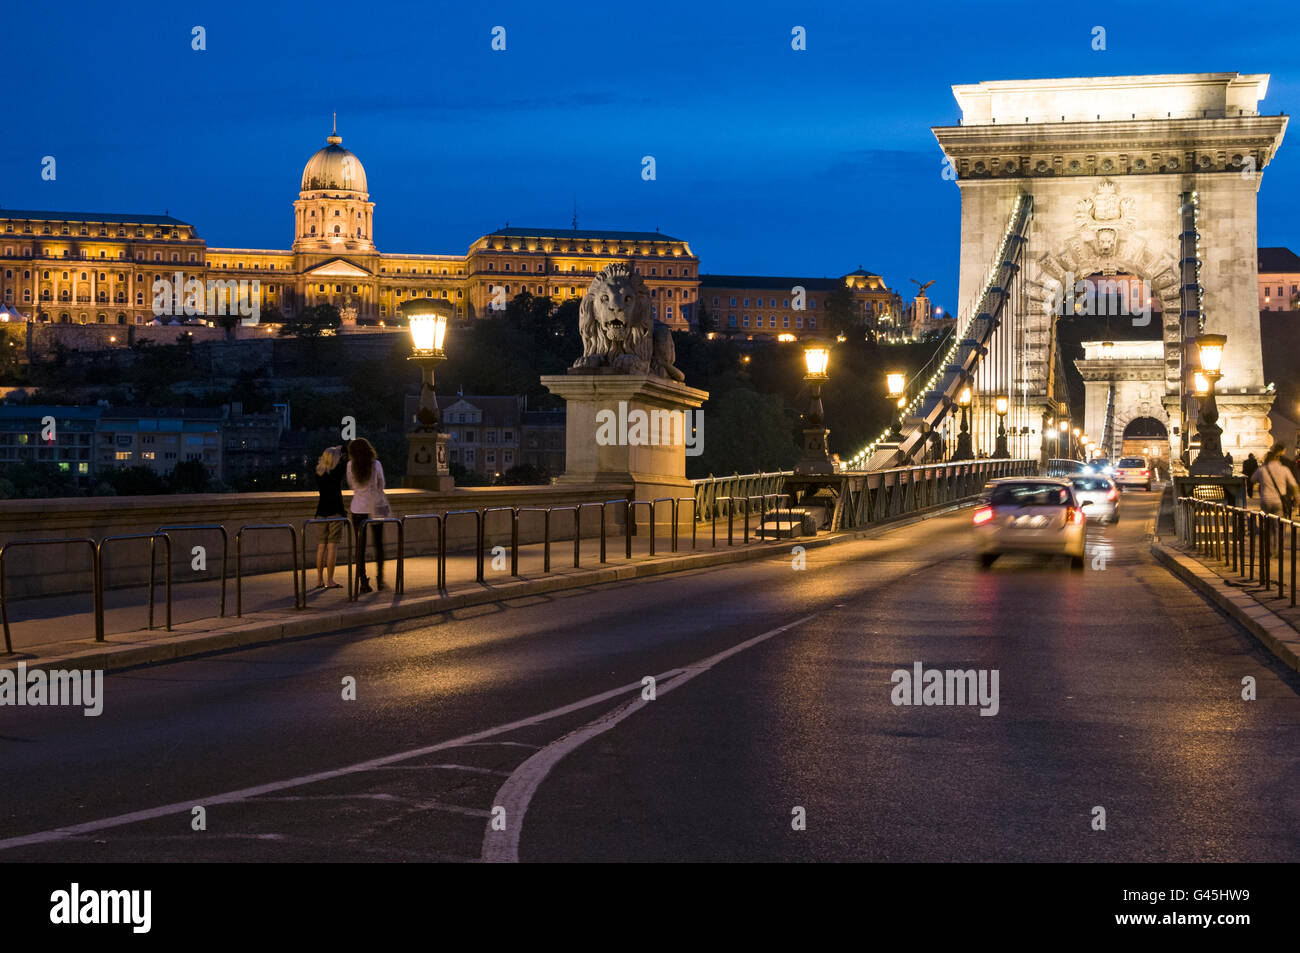 The former Royal Palace and the oldest bridge, Széchenyi Chain Bridge in Budapest in Hungary.  The Chain bridge was designed by Stock Photo